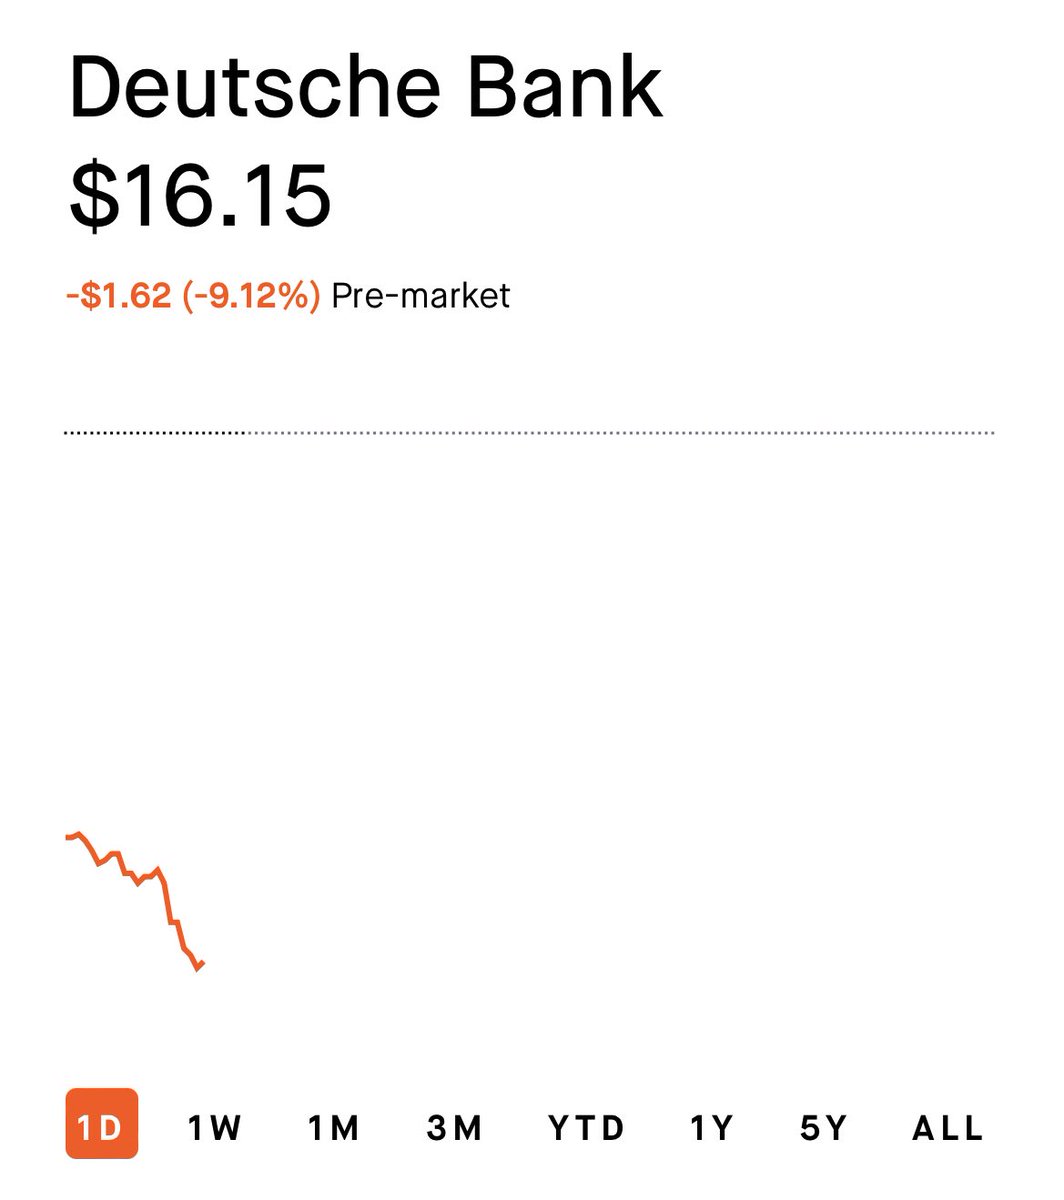 Anyhow who cares about the unfolding banking crisis anymore 🥲 $DB